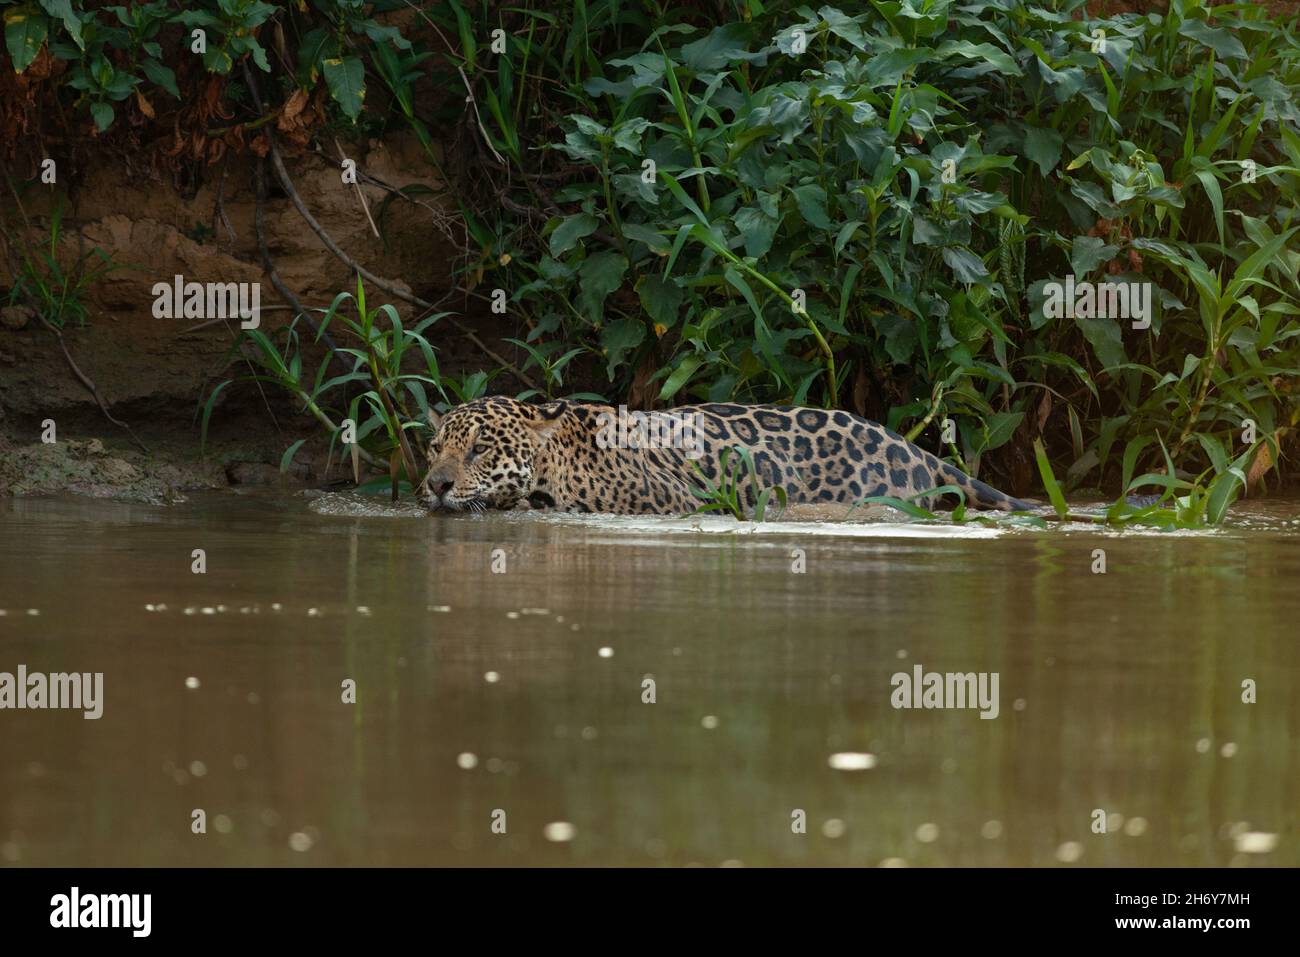 A Jaguar swimming in a river of North Pantanal, Brazil Stock Photo